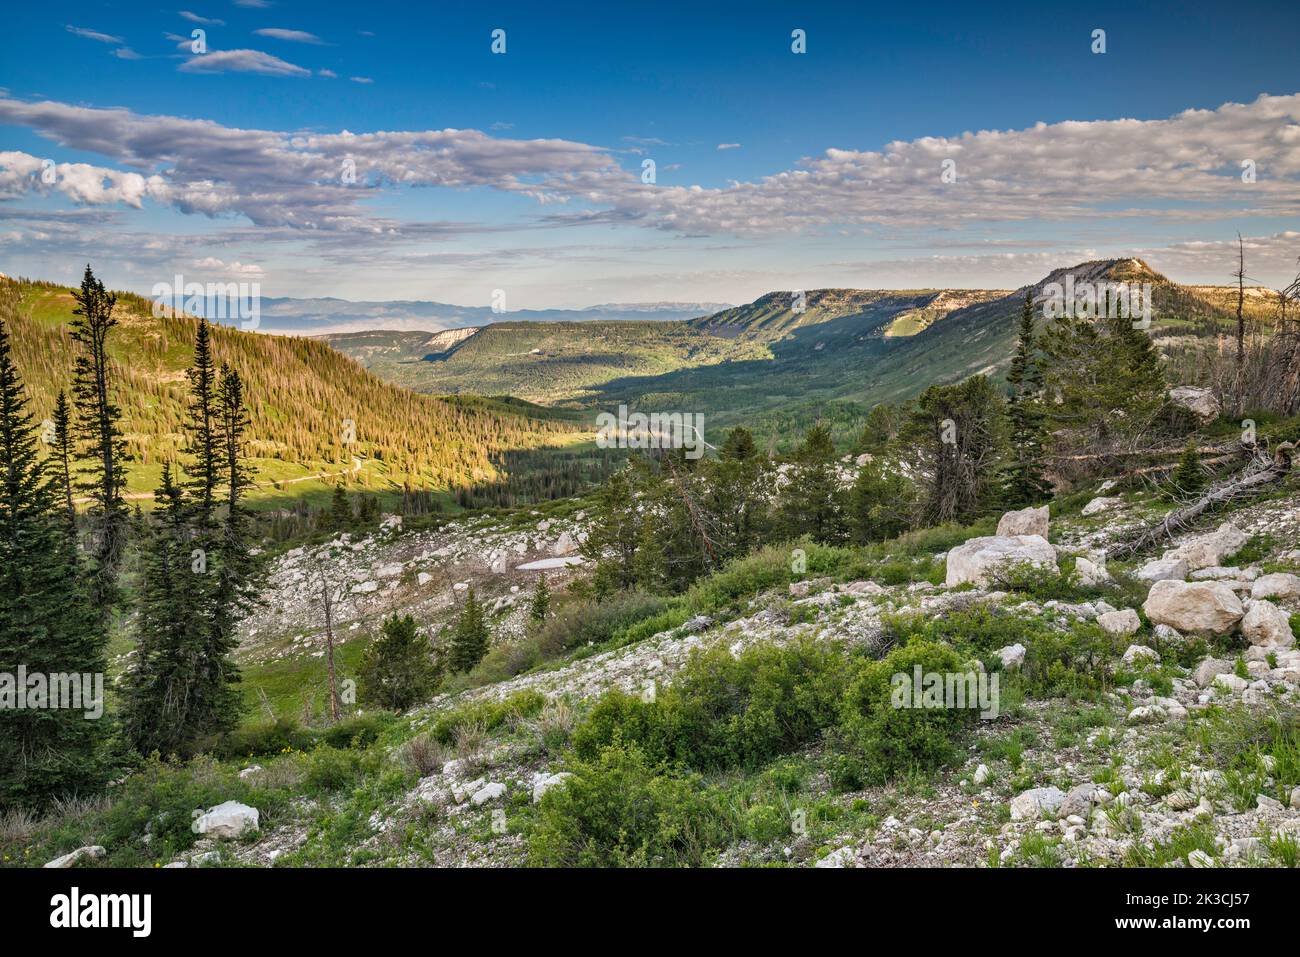 Black Mountain, Hightop on right, over Twelvemile Canyon, view from Skyline Drive (FR 022), Wasatch Plateau, Manti La Sal National Forest, Utah, USA Stock Photo